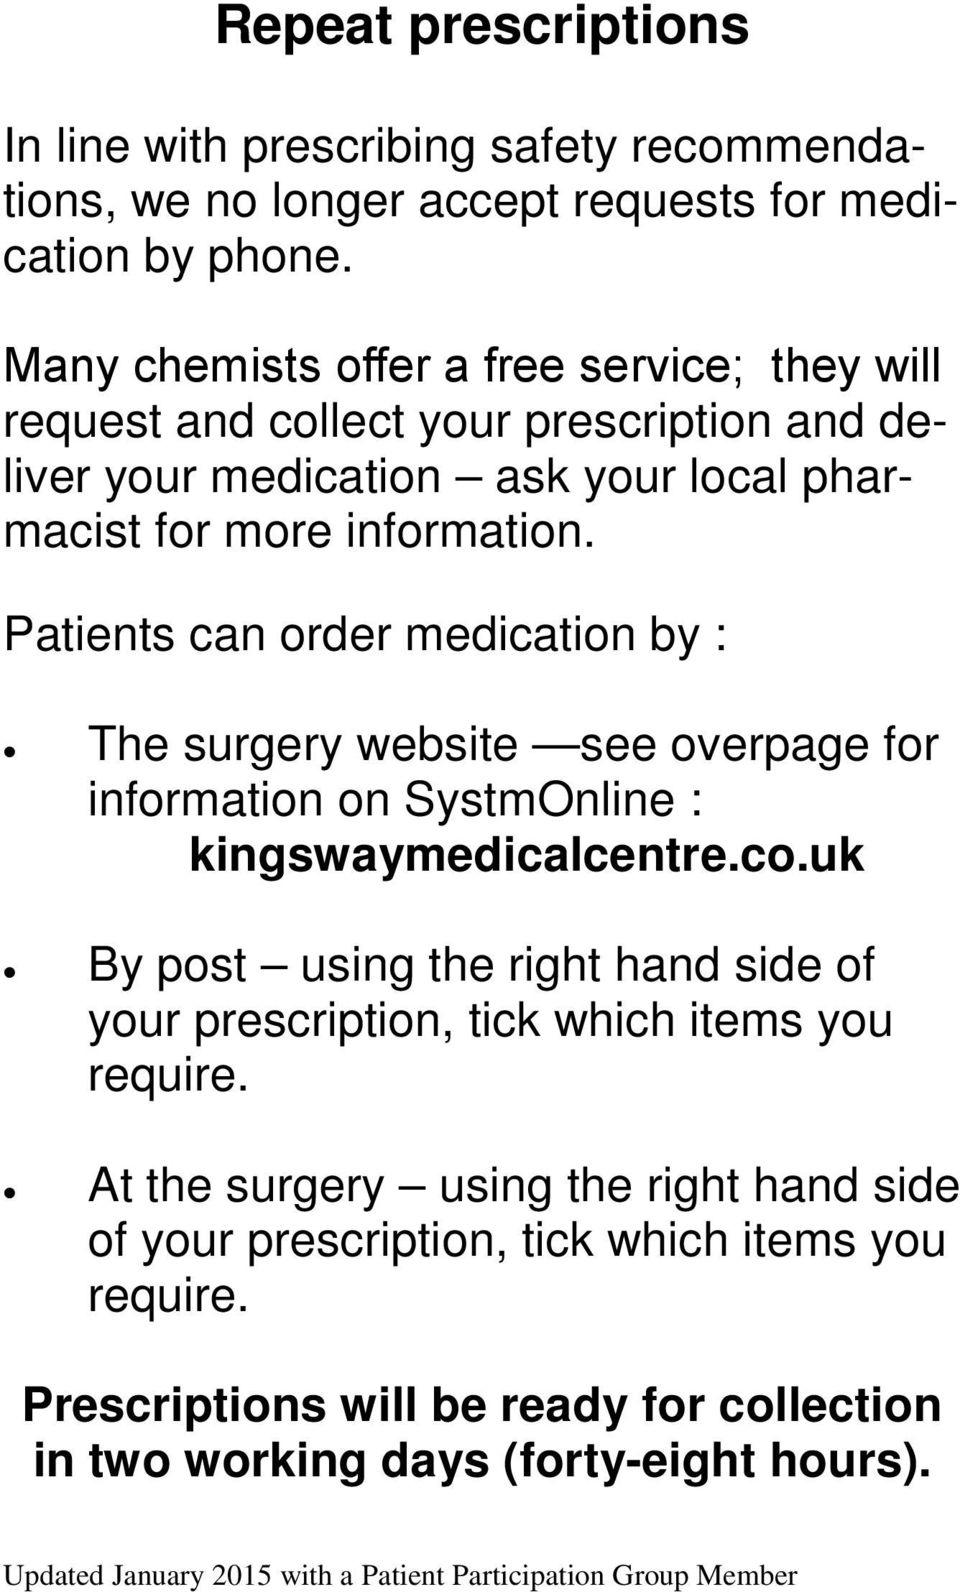 Patients can order medication by : The surgery website see overpage for information on SystmOnline : kingswaymedicalcentre.co.